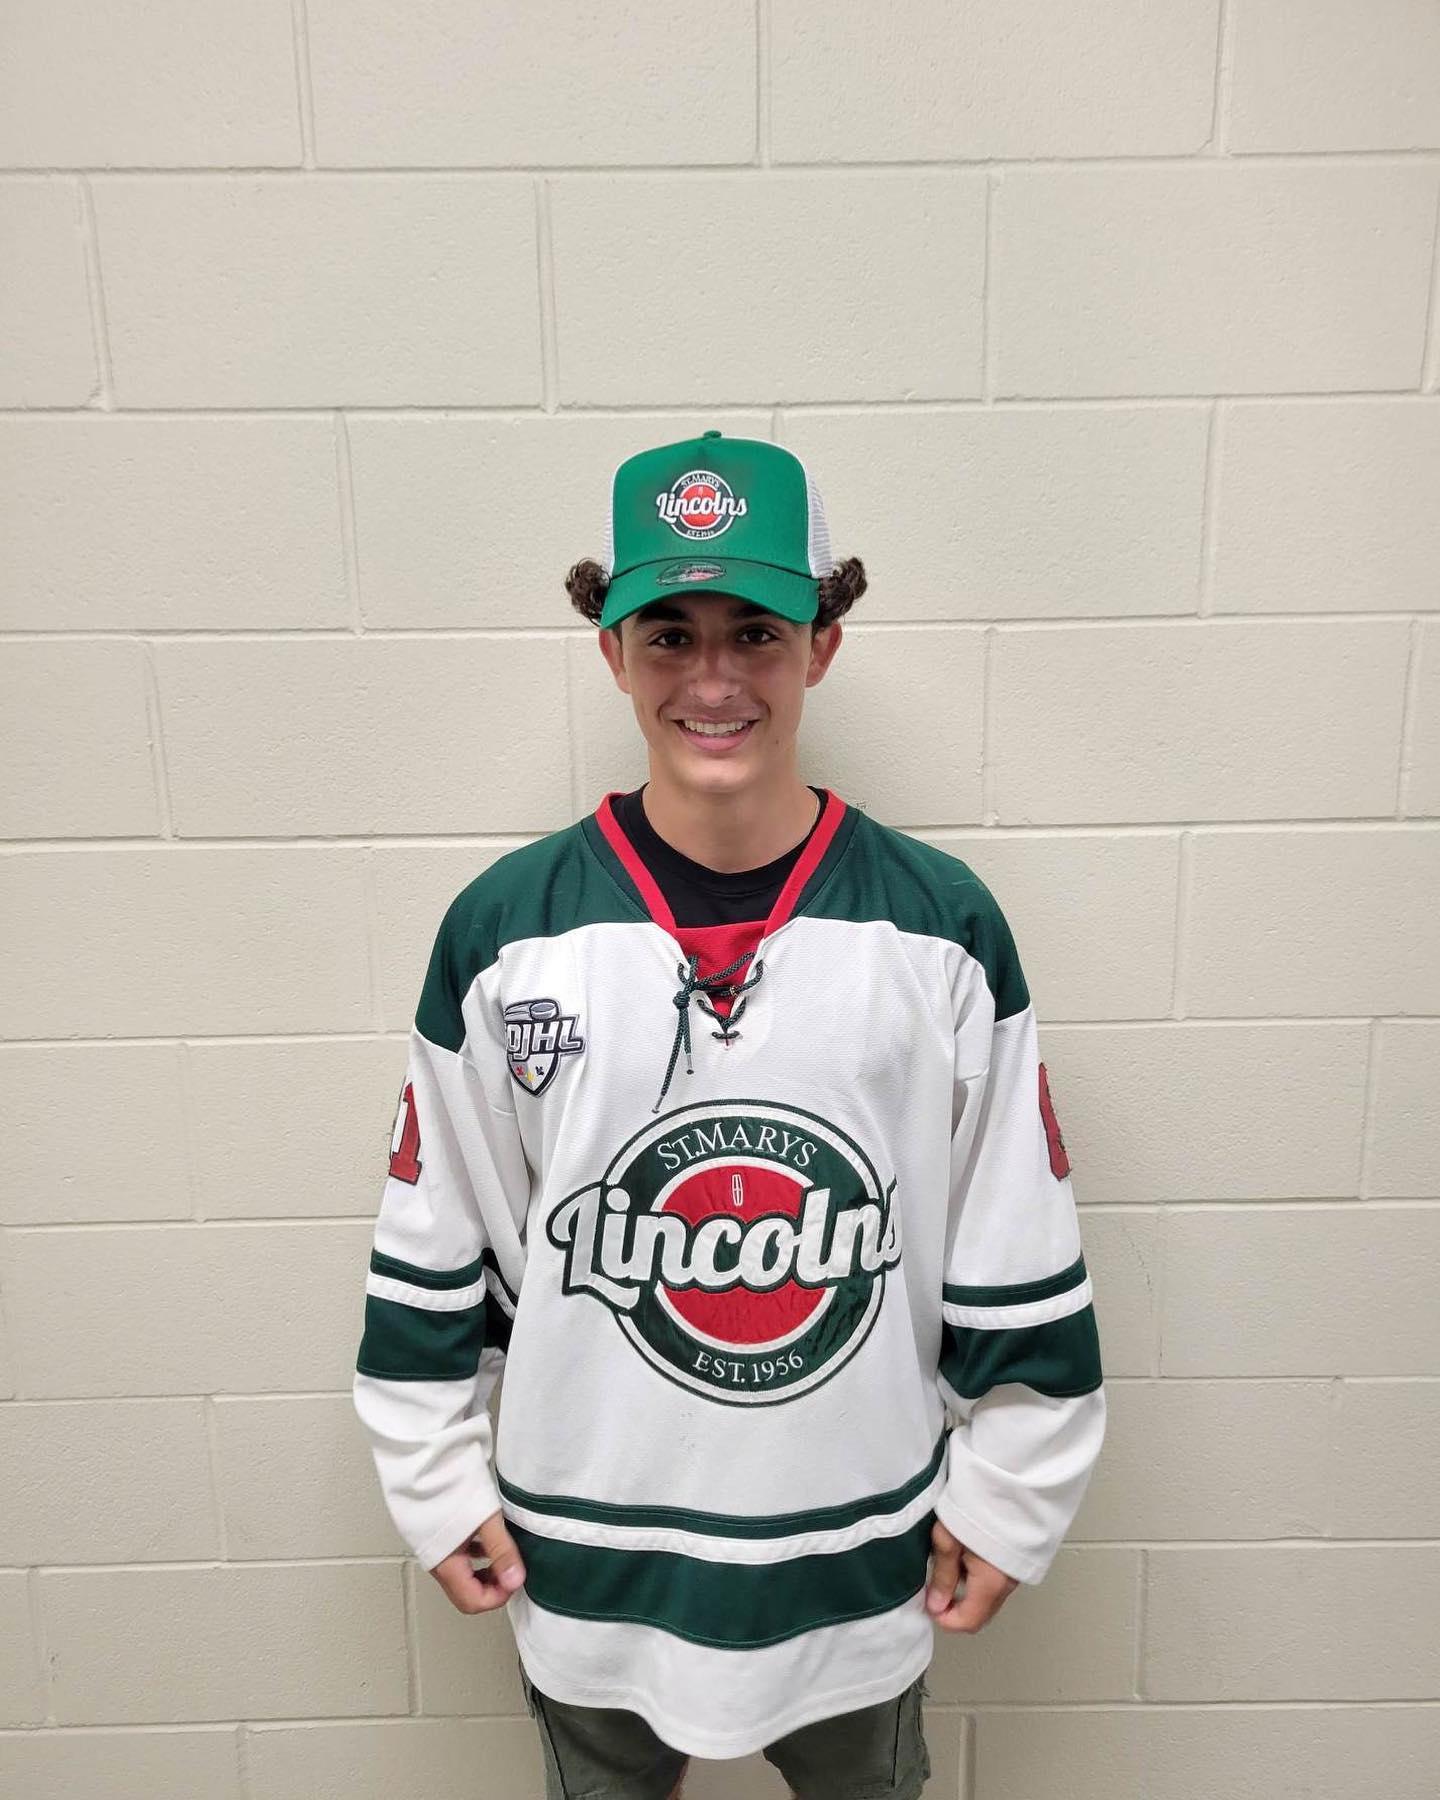 SIGNED - Lincs welcome FWD Luca Spagnolo to the Stonetown! From Milton, Luca led the U18 AAA Burlington Eagles in points last season #WeAreLincolns @l.spags